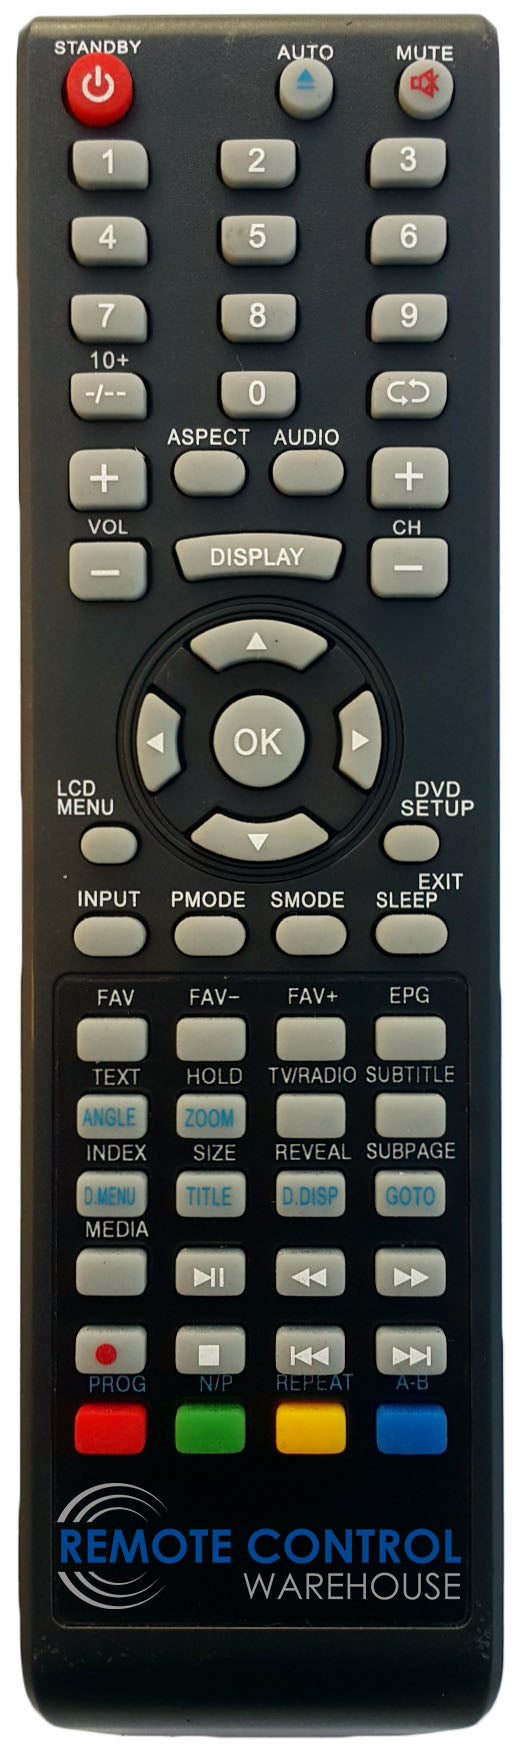 REPLACEMENT SPHERE REMOTE CONTROL FOR SPHERE OX236LED  TV - Remote Control Warehouse